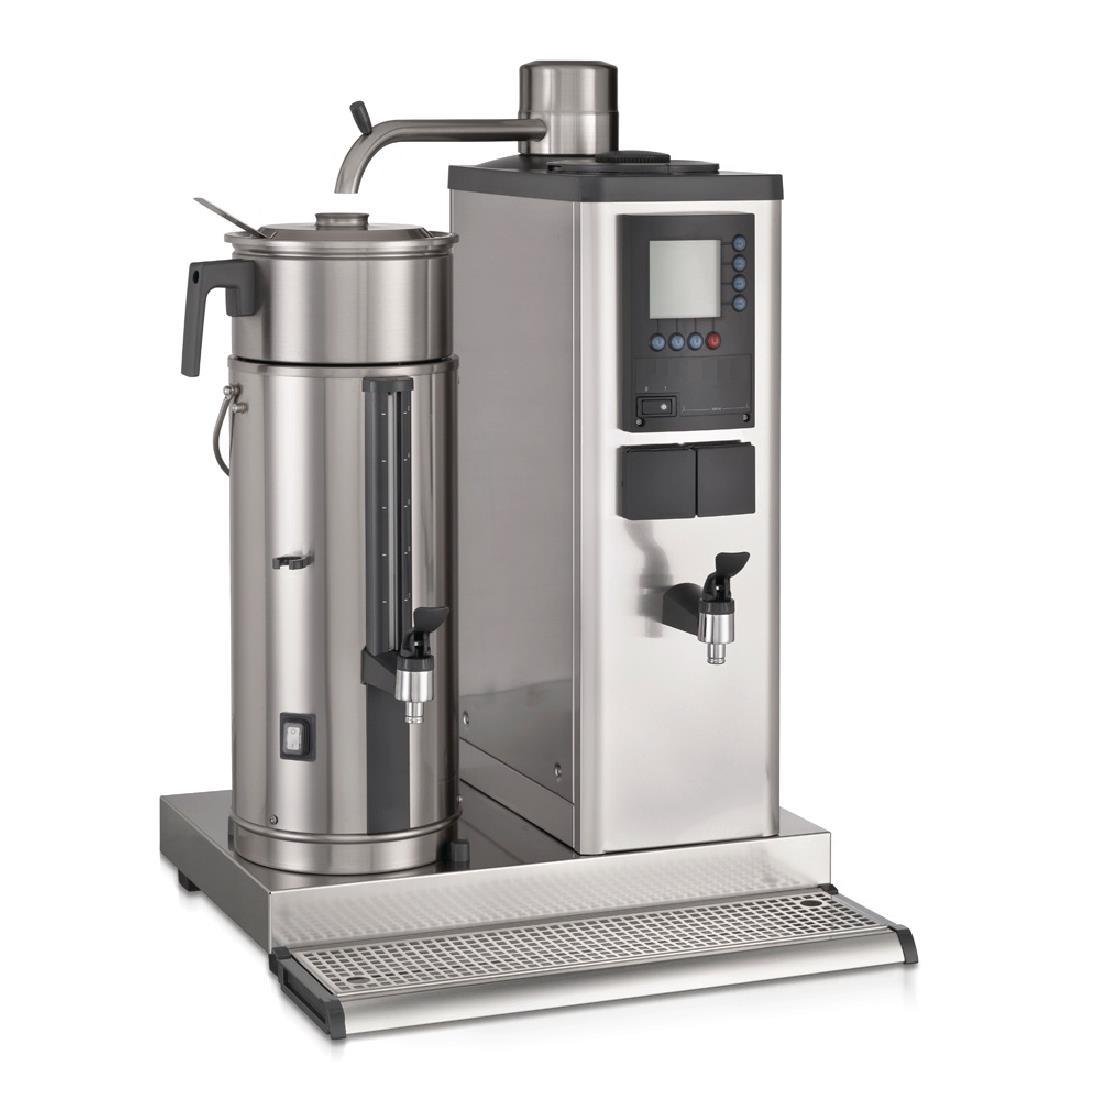 Bravilor B10 HWL Bulk Coffee Brewer with 10Ltr Coffee Urn and Hot Water Tap 3 Phase - DC688  - 1